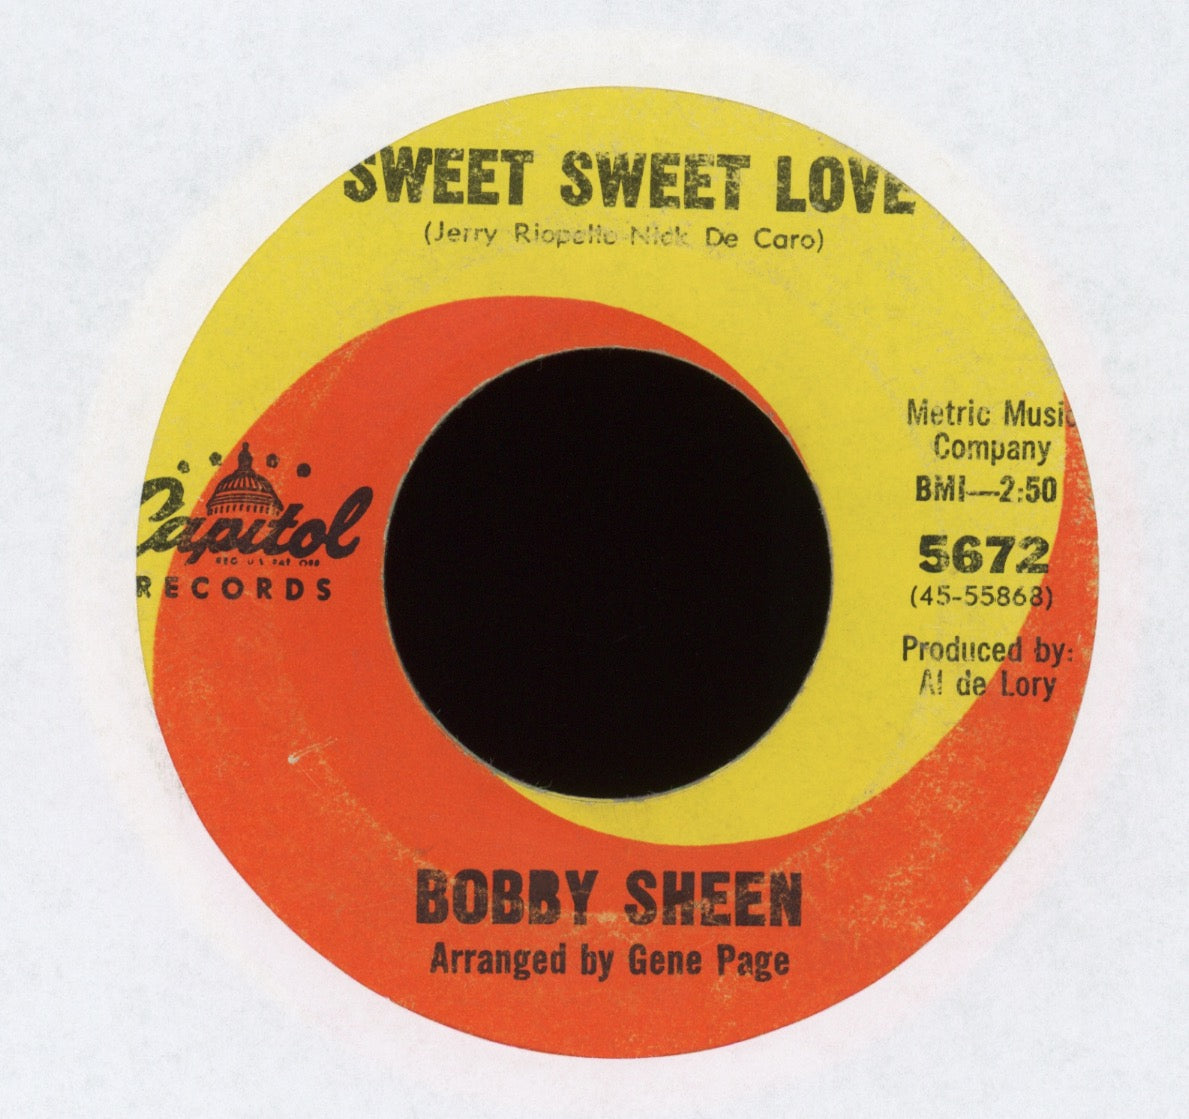 Bobby Sheen - Dr. Love on Capitol